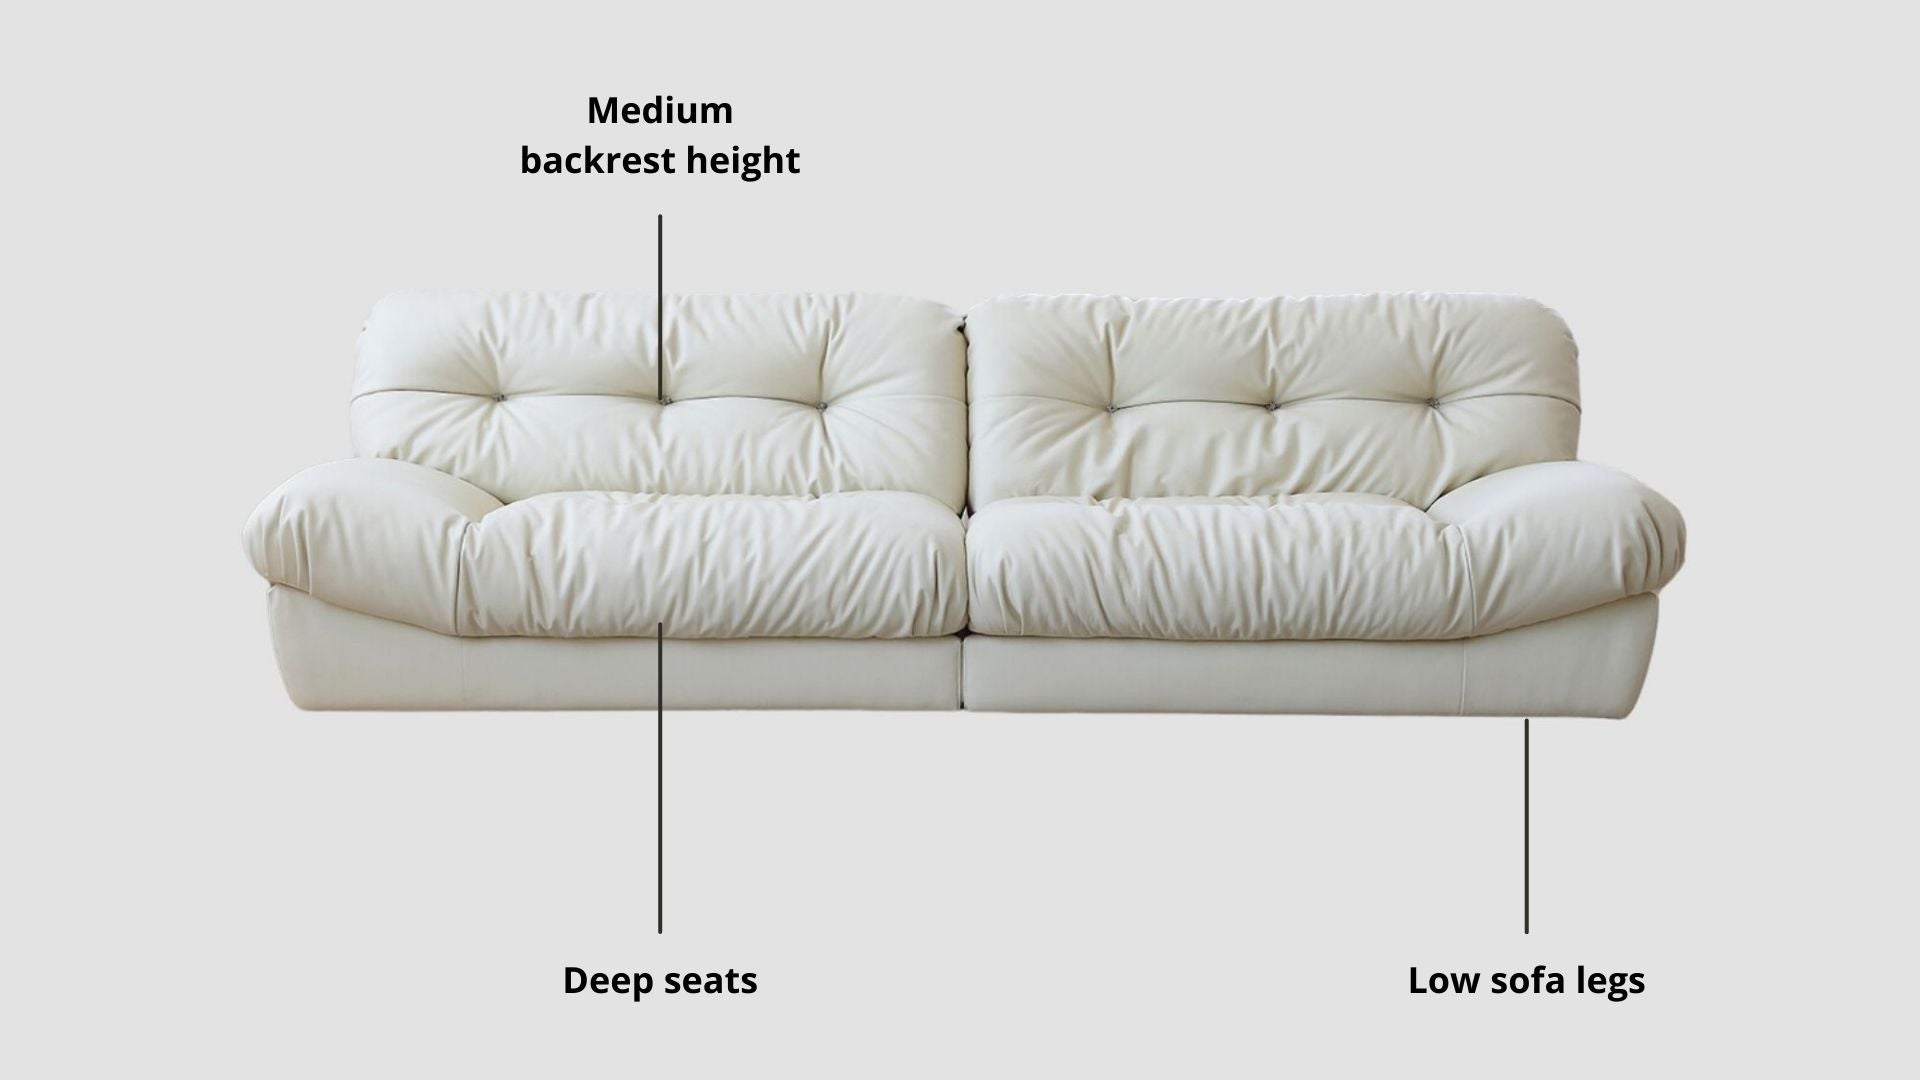 Key features such as armrest thickness, cushion height, seat depth and sofa leg height for Clora Full Leather Sofa